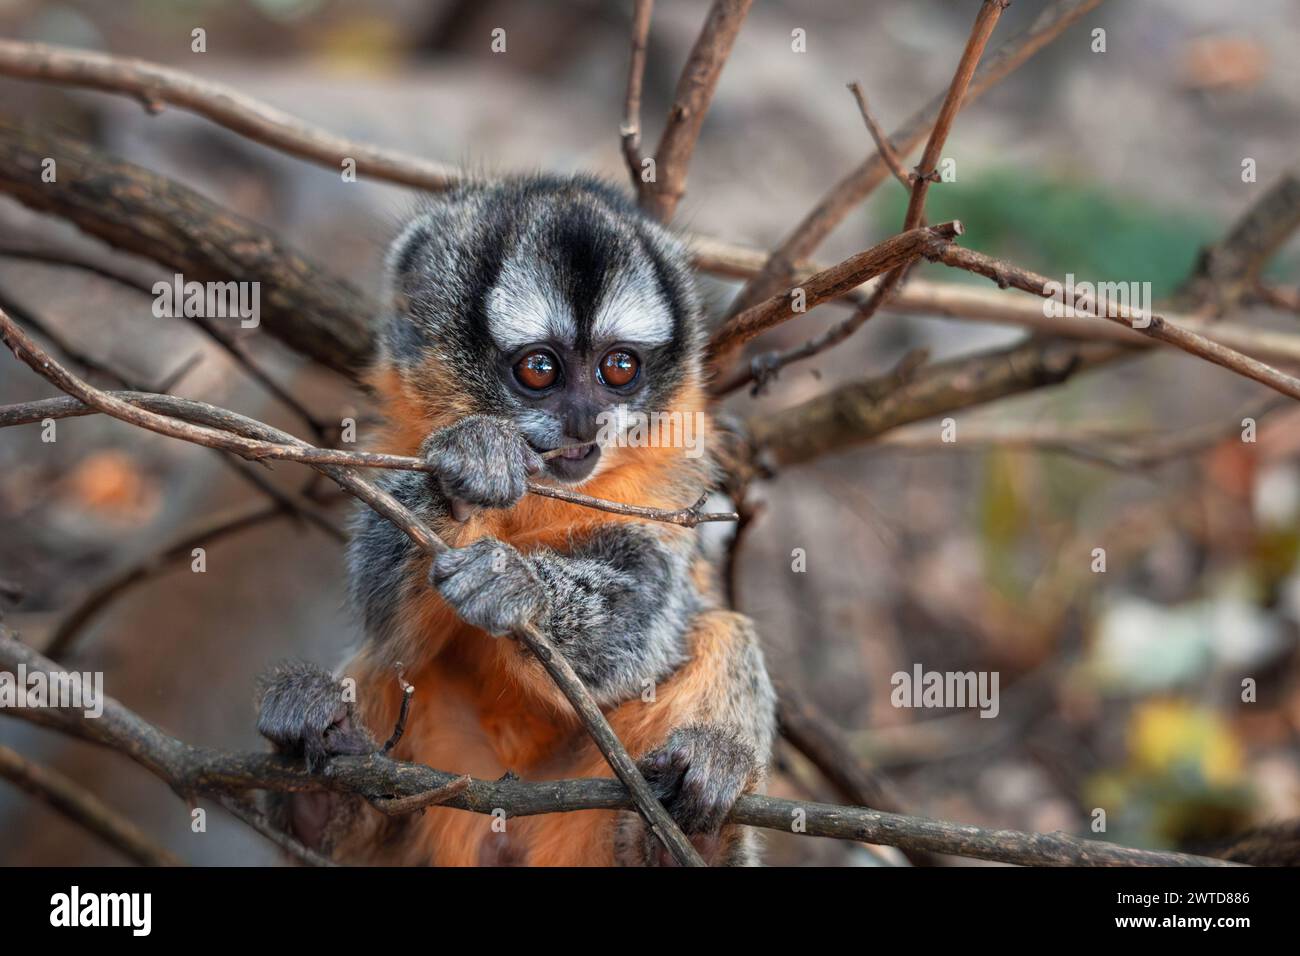 Adorable three-striped night monkey baby playing. Friendly inquisitive playful monkey. Aotus trivirgatus, also known as northern night monkey. Stock Photo